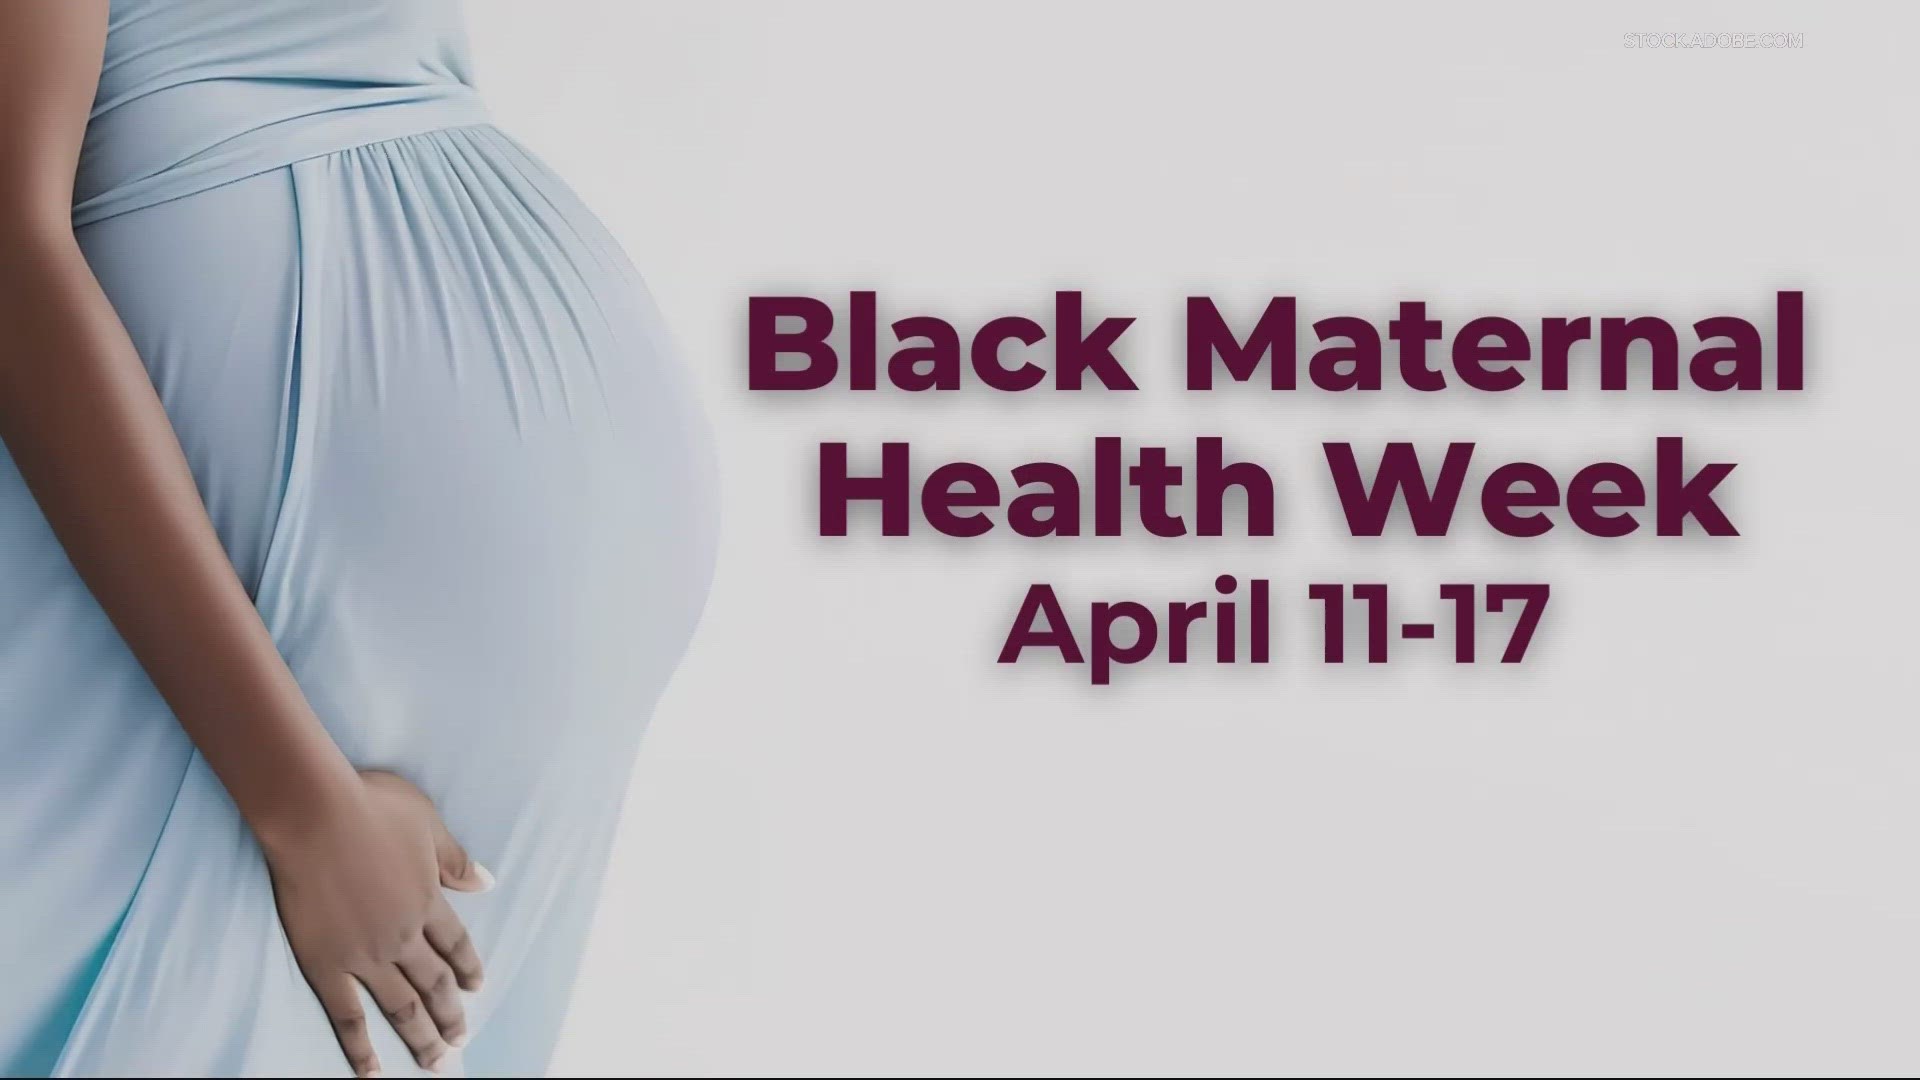 U.S. maternal death rates are climbing, and Black women three times more likely to die from pregnancy related causes than white women.